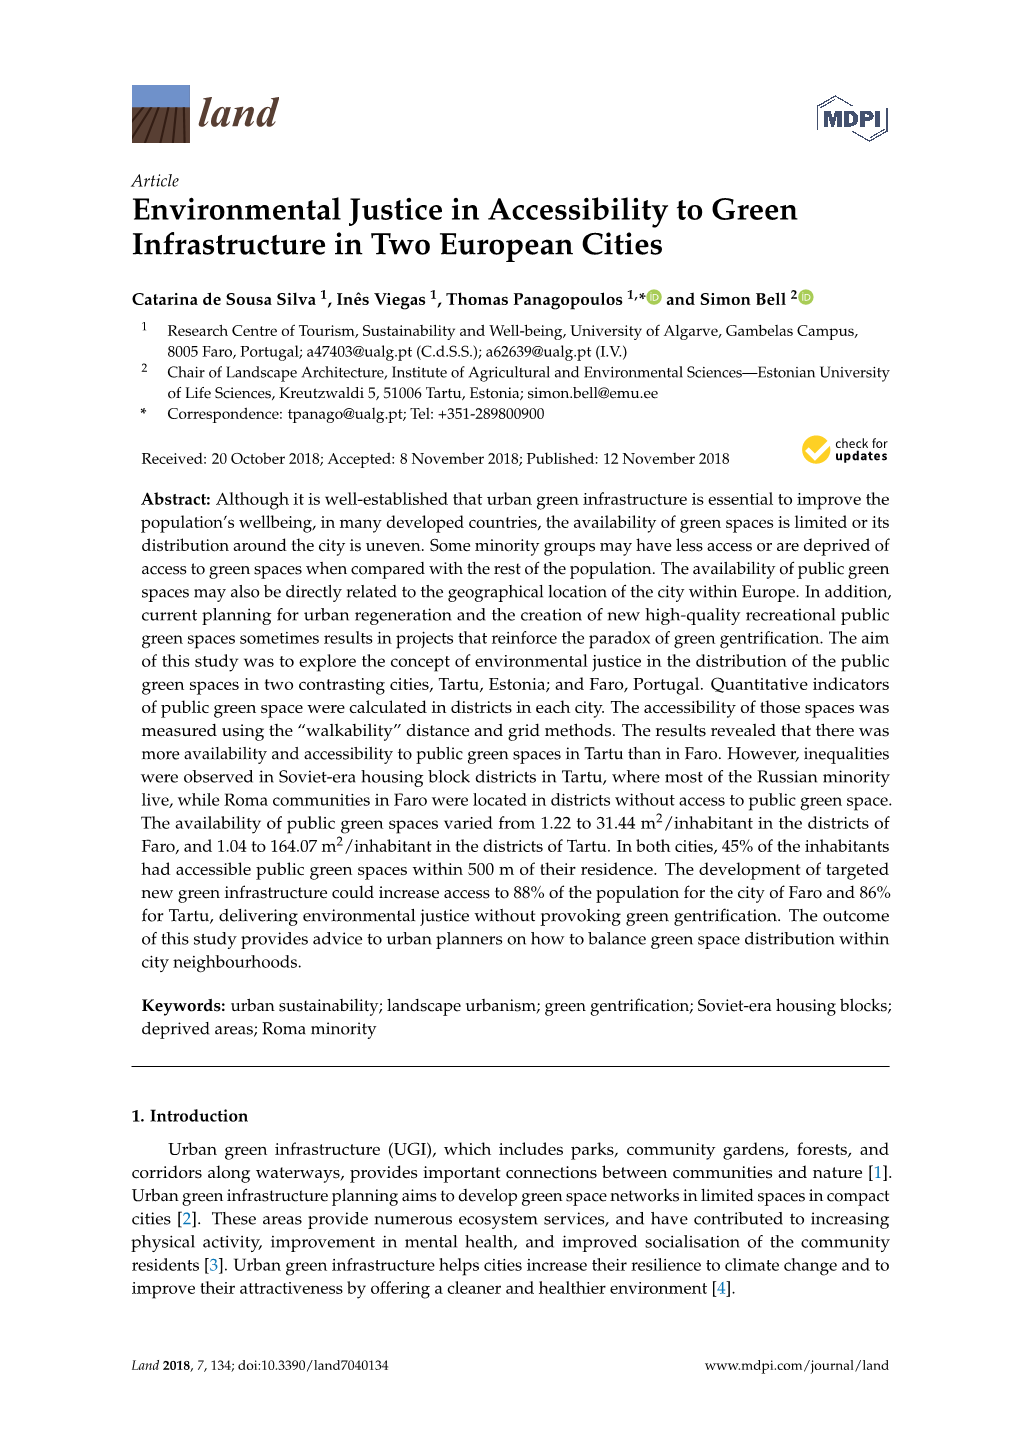 Environmental Justice in Accessibility to Green Infrastructure in Two European Cities